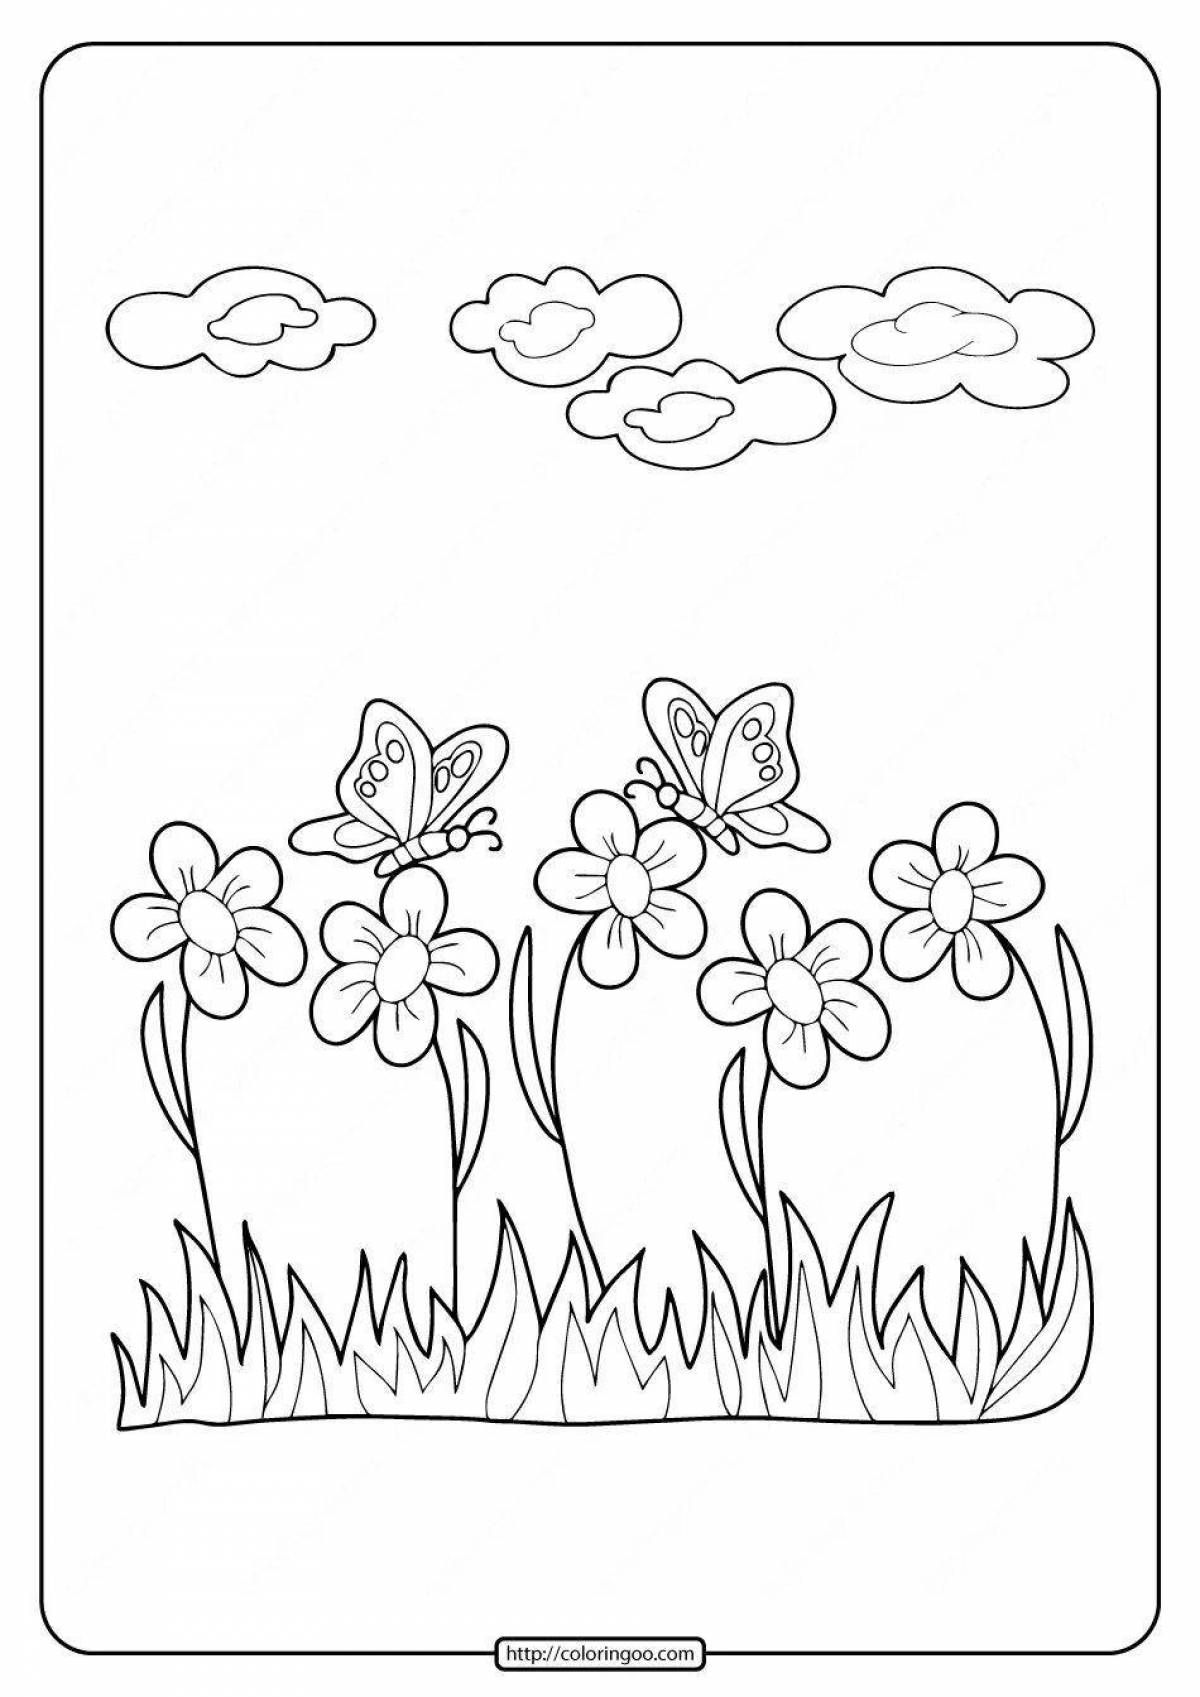 Exquisite coloring book for coloring